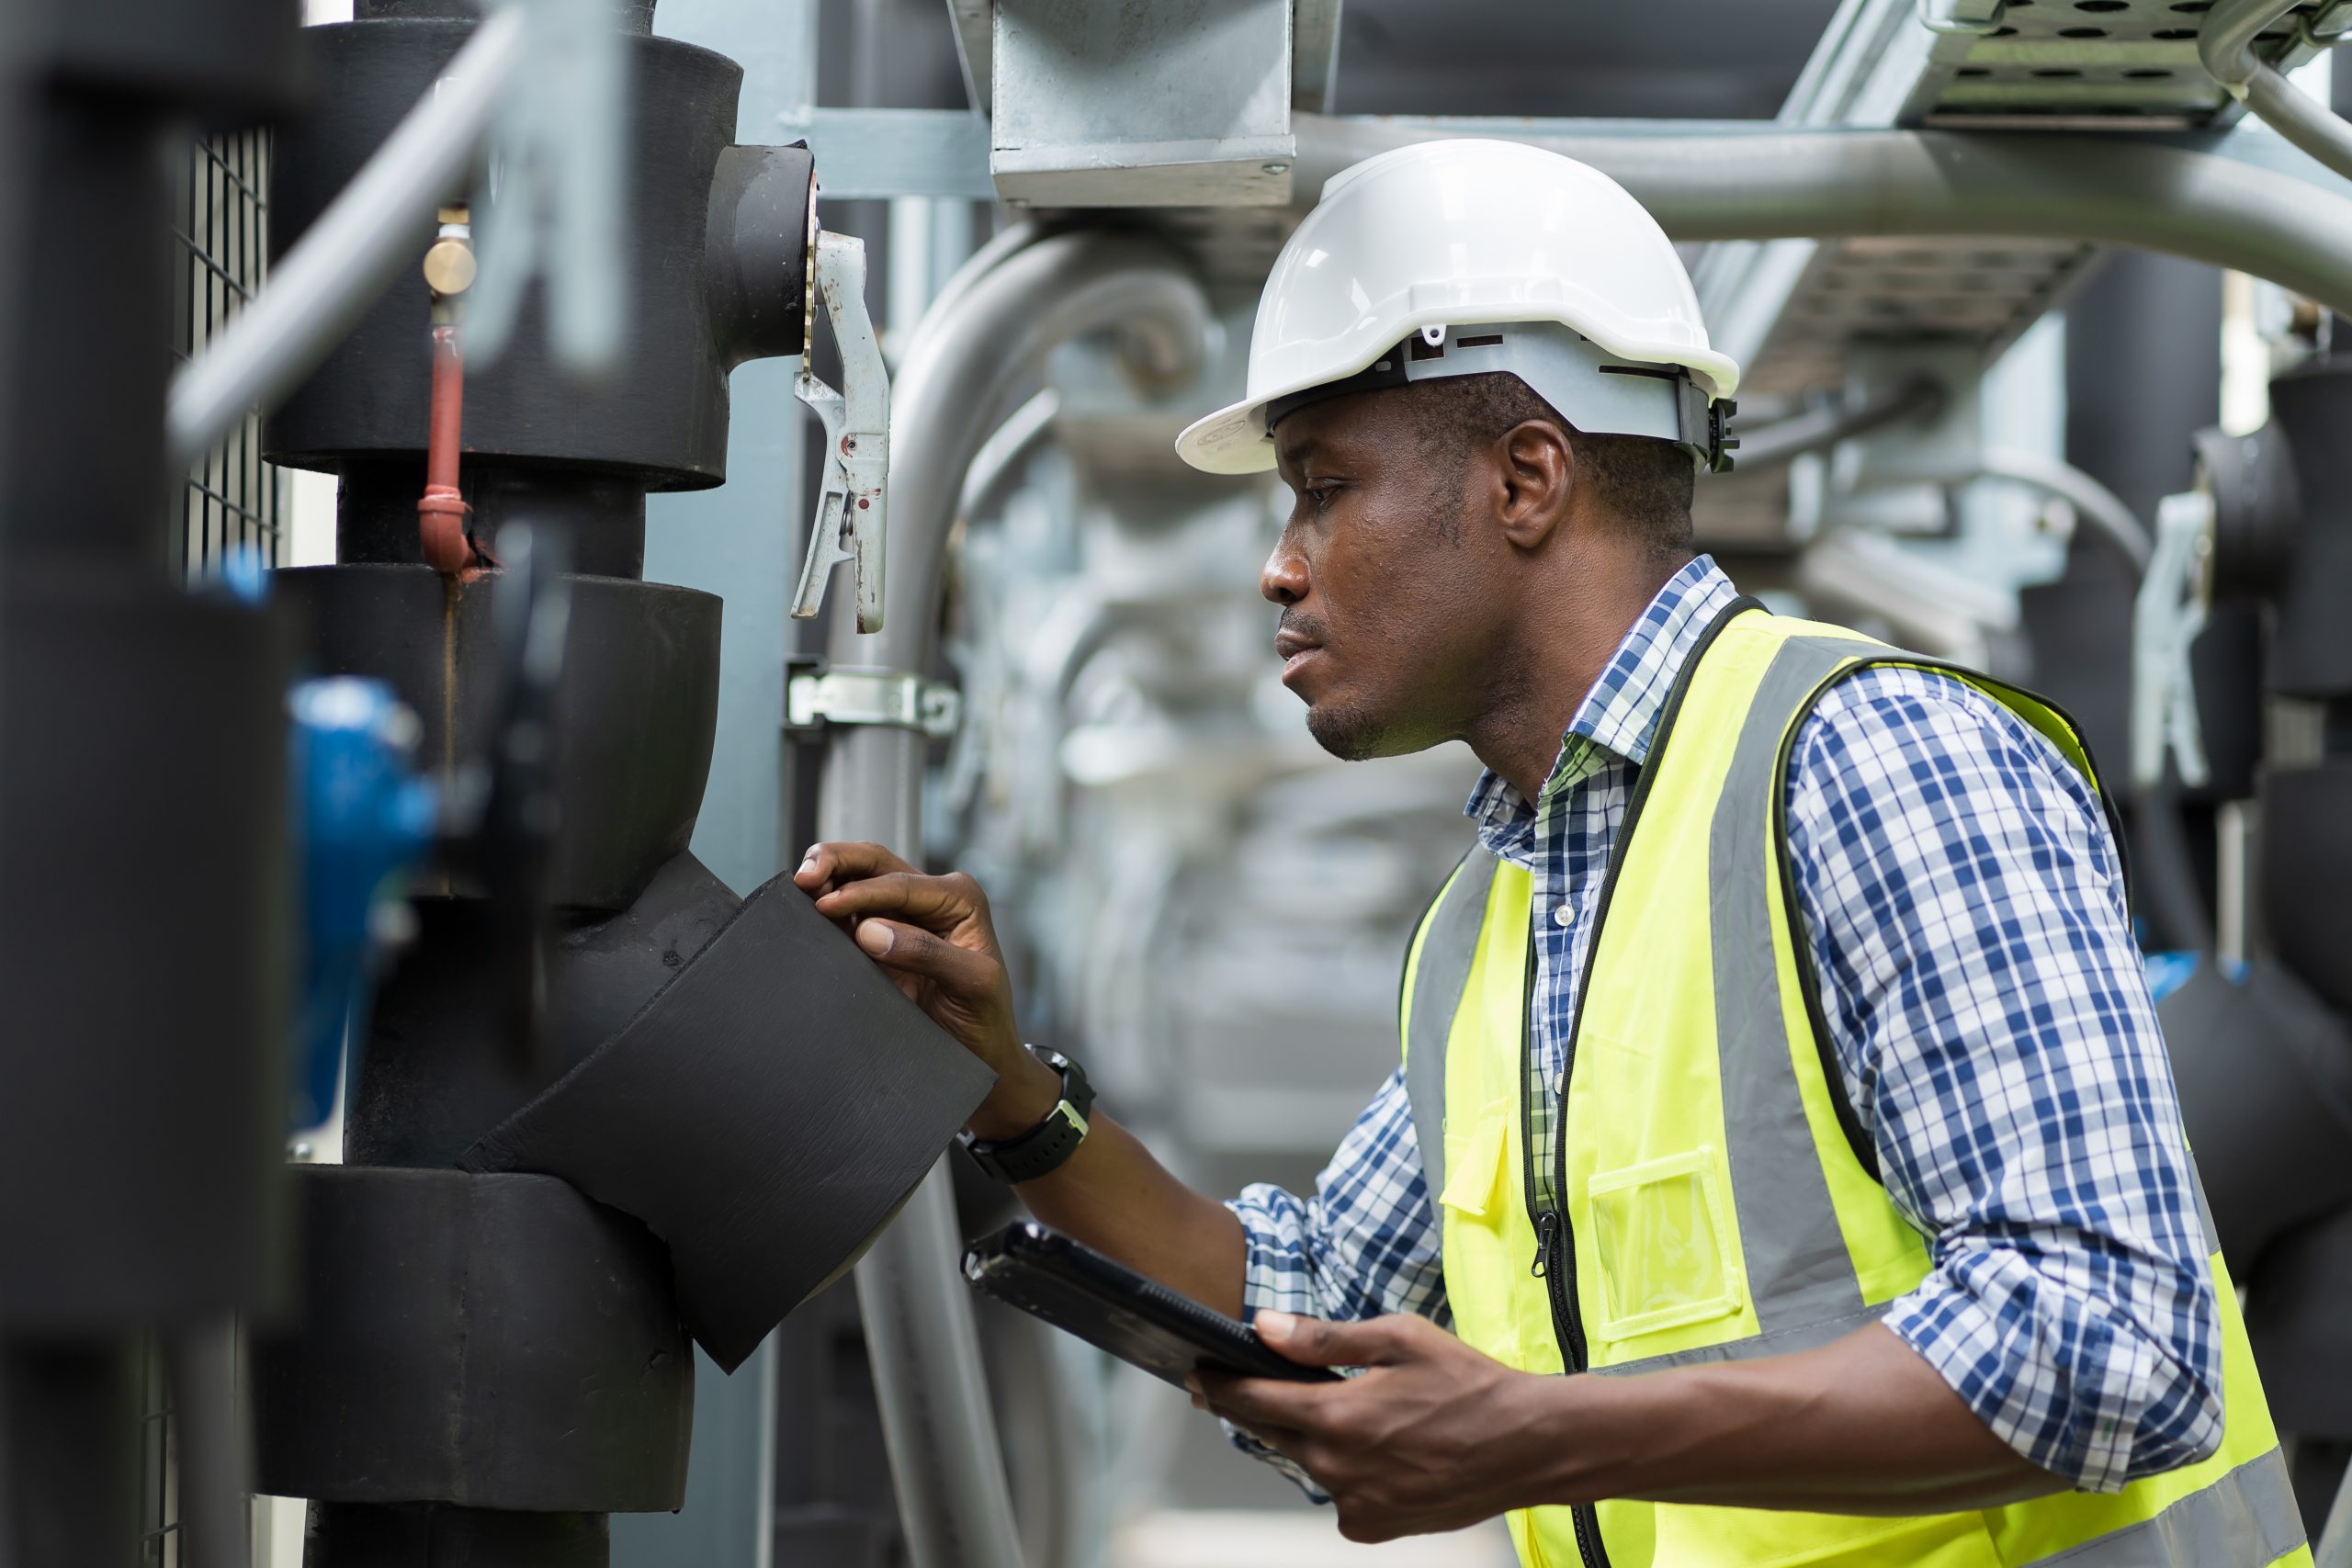 Male Plumber Engineer Worker Work With Digital Tablet In Sewer Pipes Area At Construction Site. African American Male Engineer Worker Check Or Maintenance Sewer Pipe Network System At Construction Sit